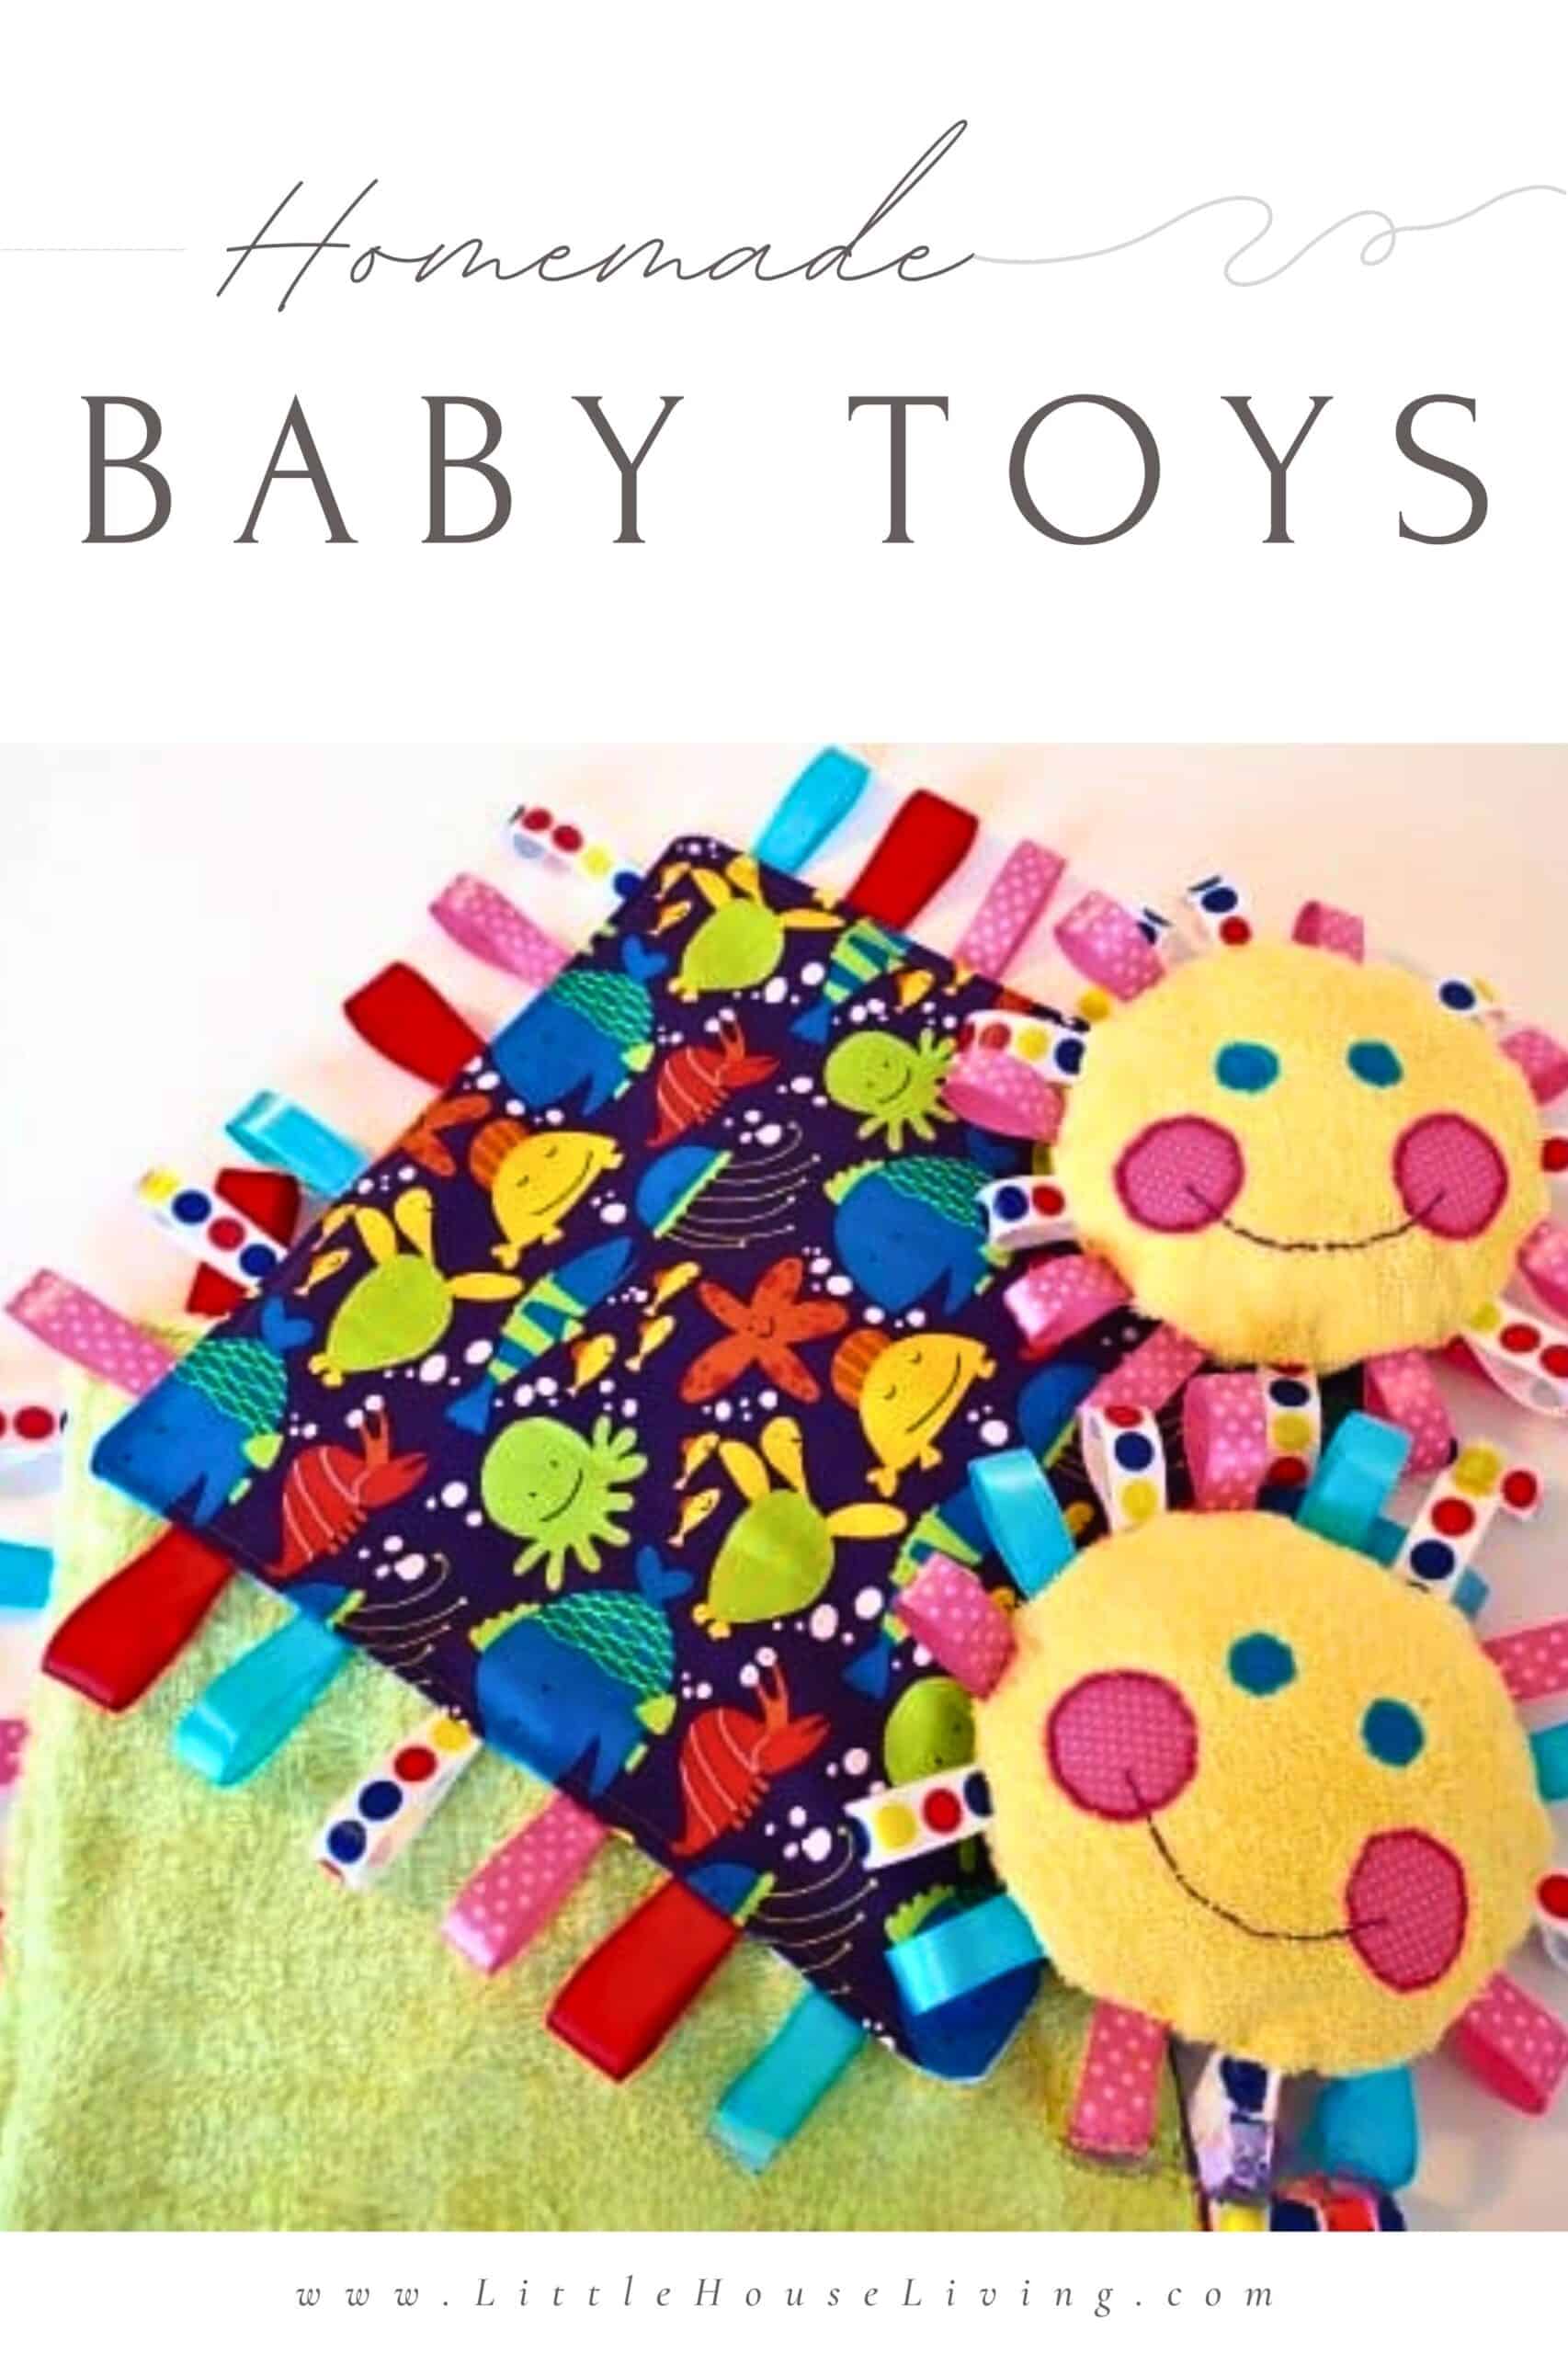 Have you ever wondered why clothes and toys for babies are so expensive? They only use small pieces of fabric, so why pay so much money, especially when you can make these adorable and frugal Homemade Baby Toys?